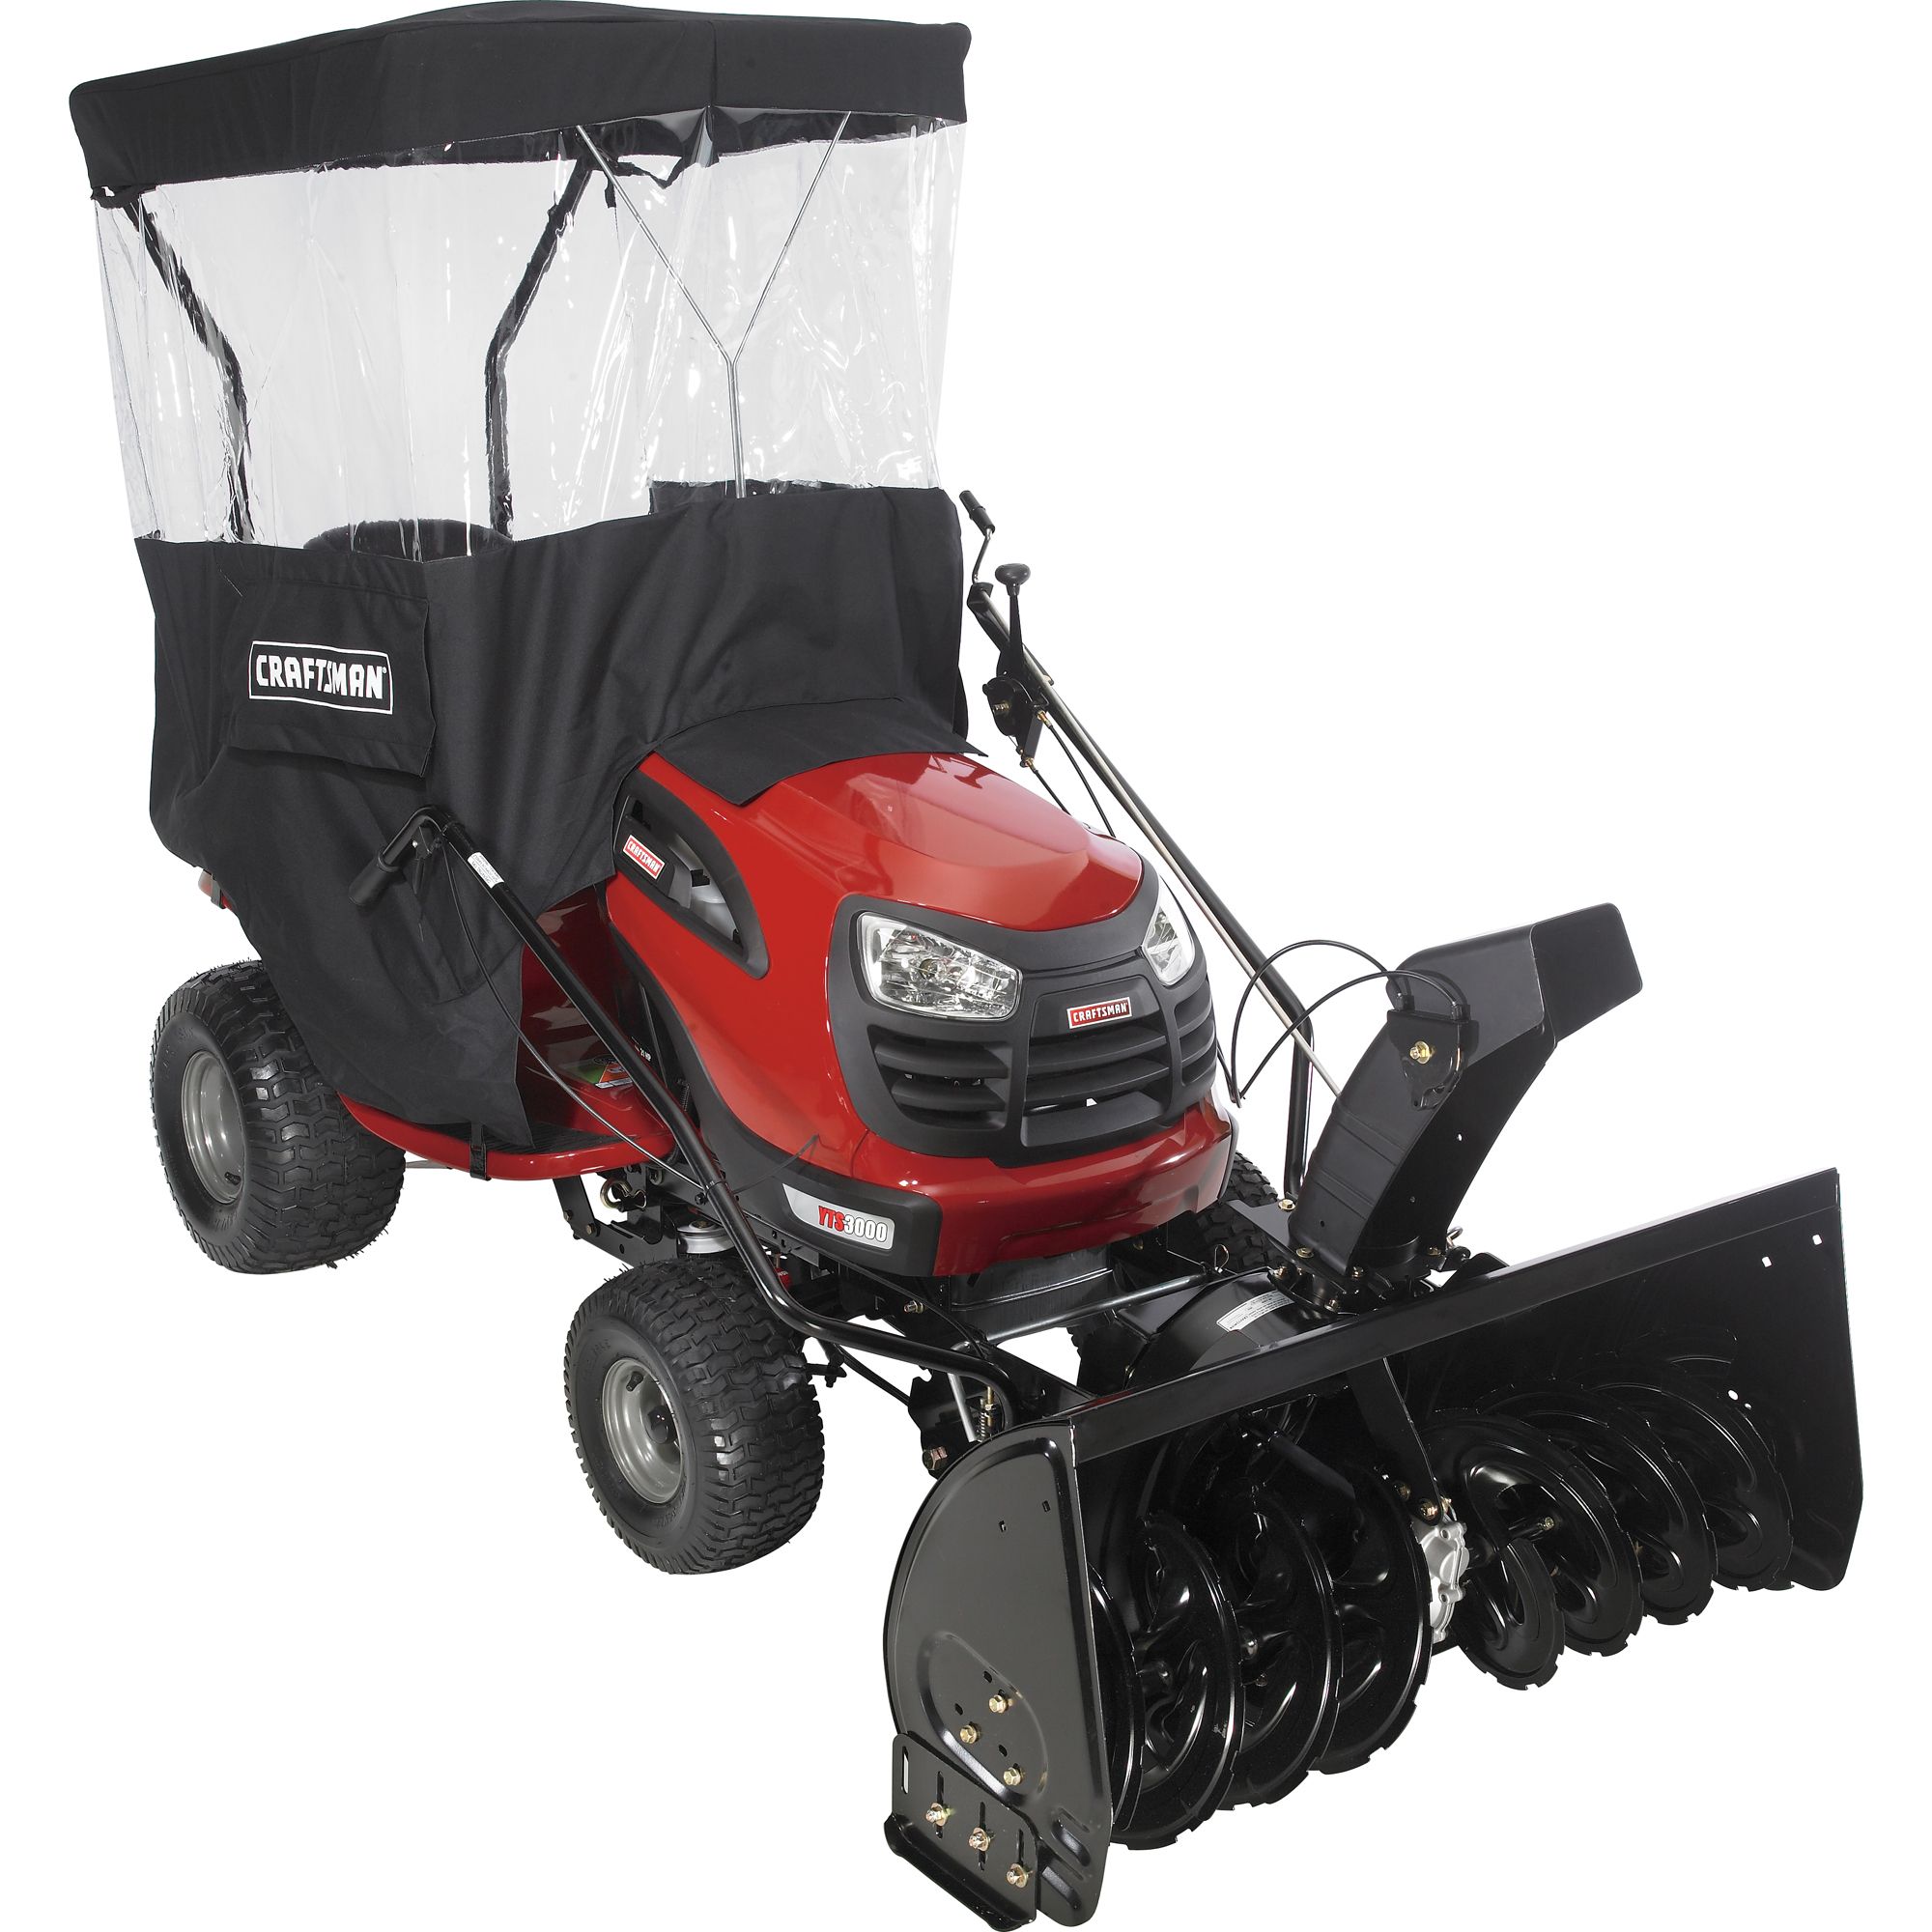 Where to buy for sale Craftsman snow blower attachments?